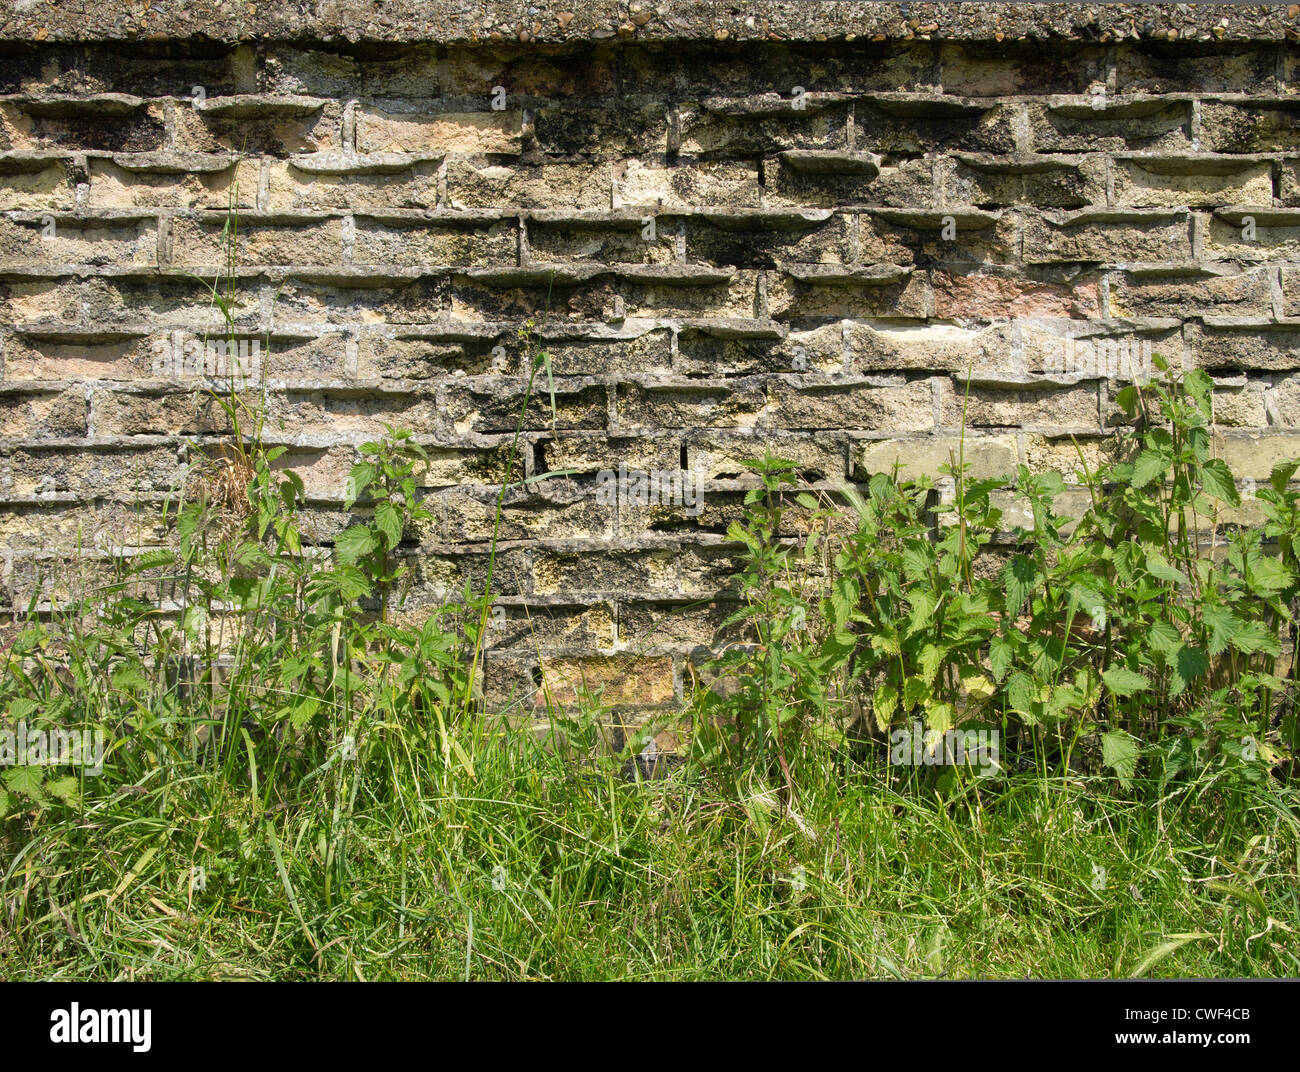 Nettles leaning against an eroding brick wall Stock Photo